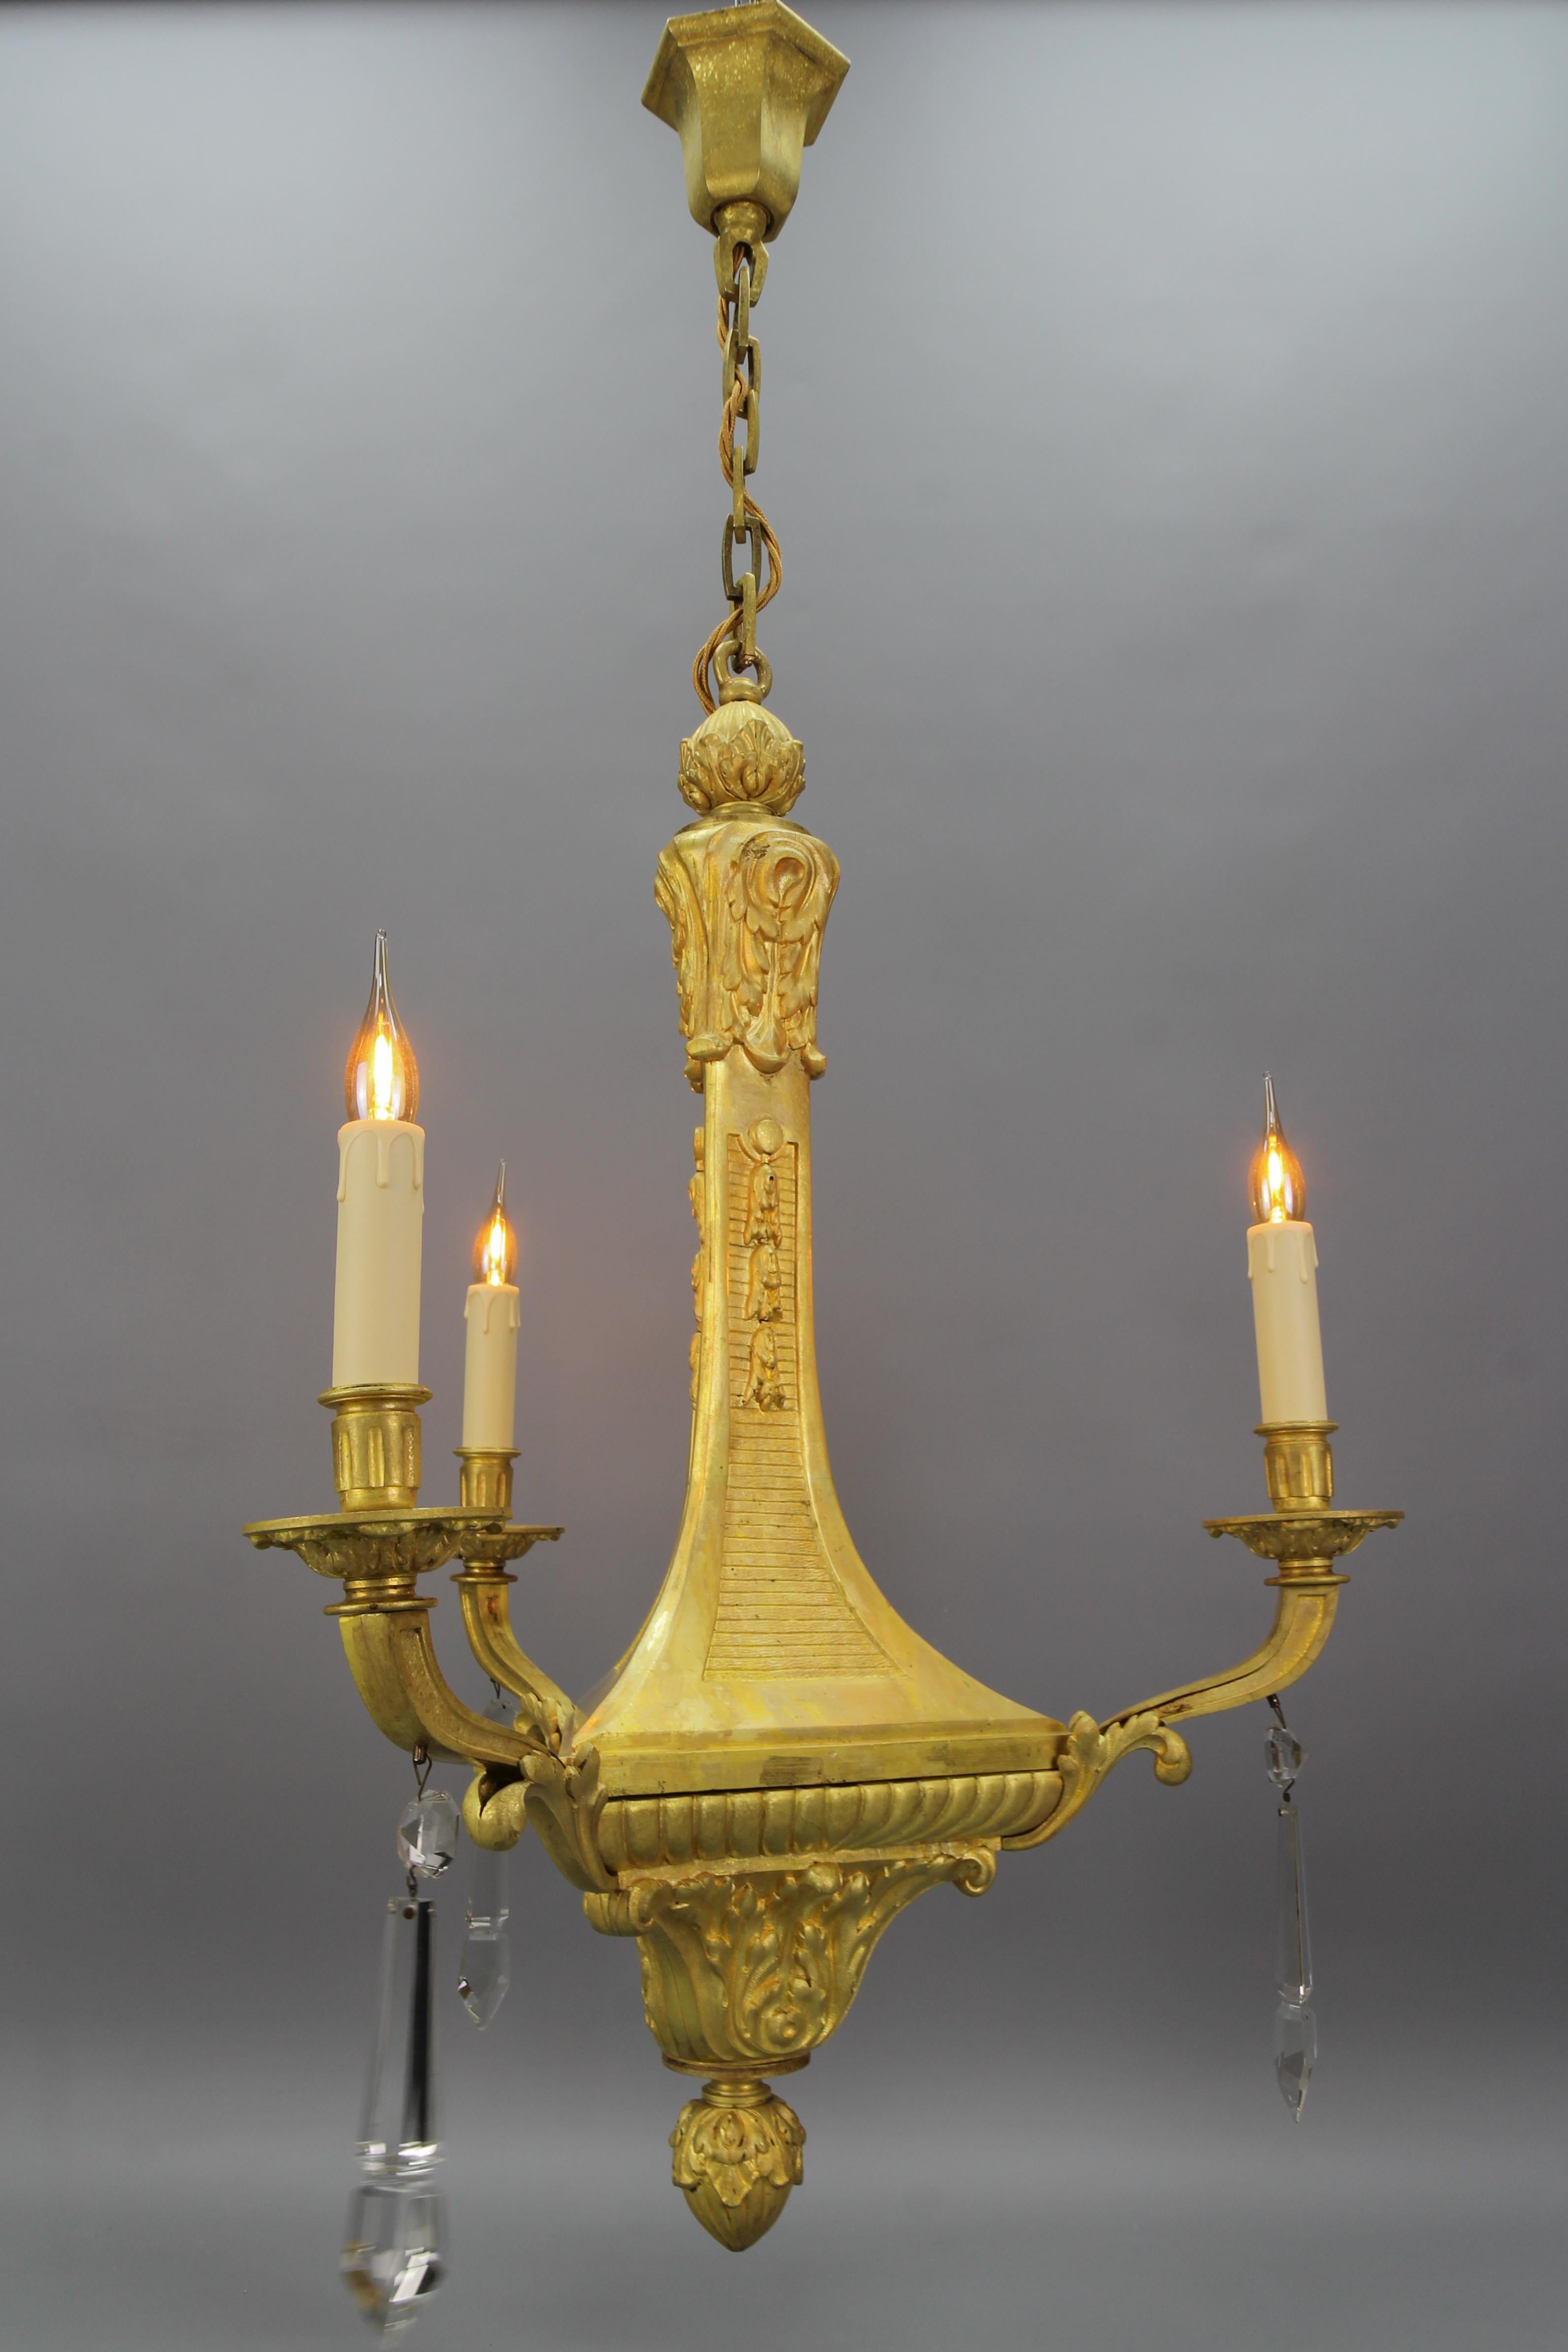 French Louis XVI style bronze and crystal three-light chandelier from the early 20th century.
This impressive and unusually shaped Louis XVI-style bronze chandelier, richly decorated with acanthus leaves, features three bronze arms, each with a